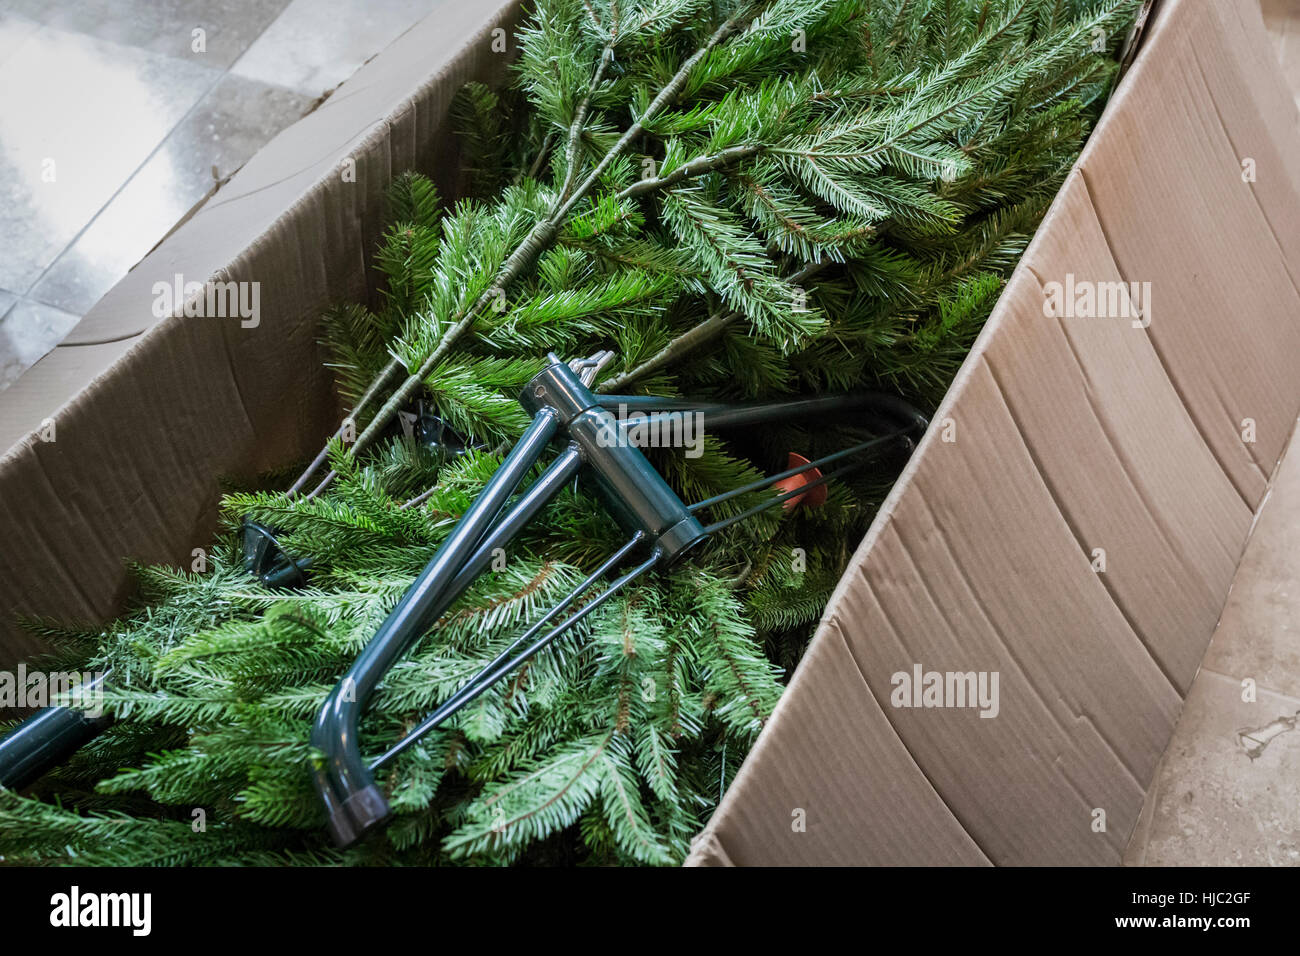 Artificial Christmas tree packed away in a cardboard box. Stock Photo